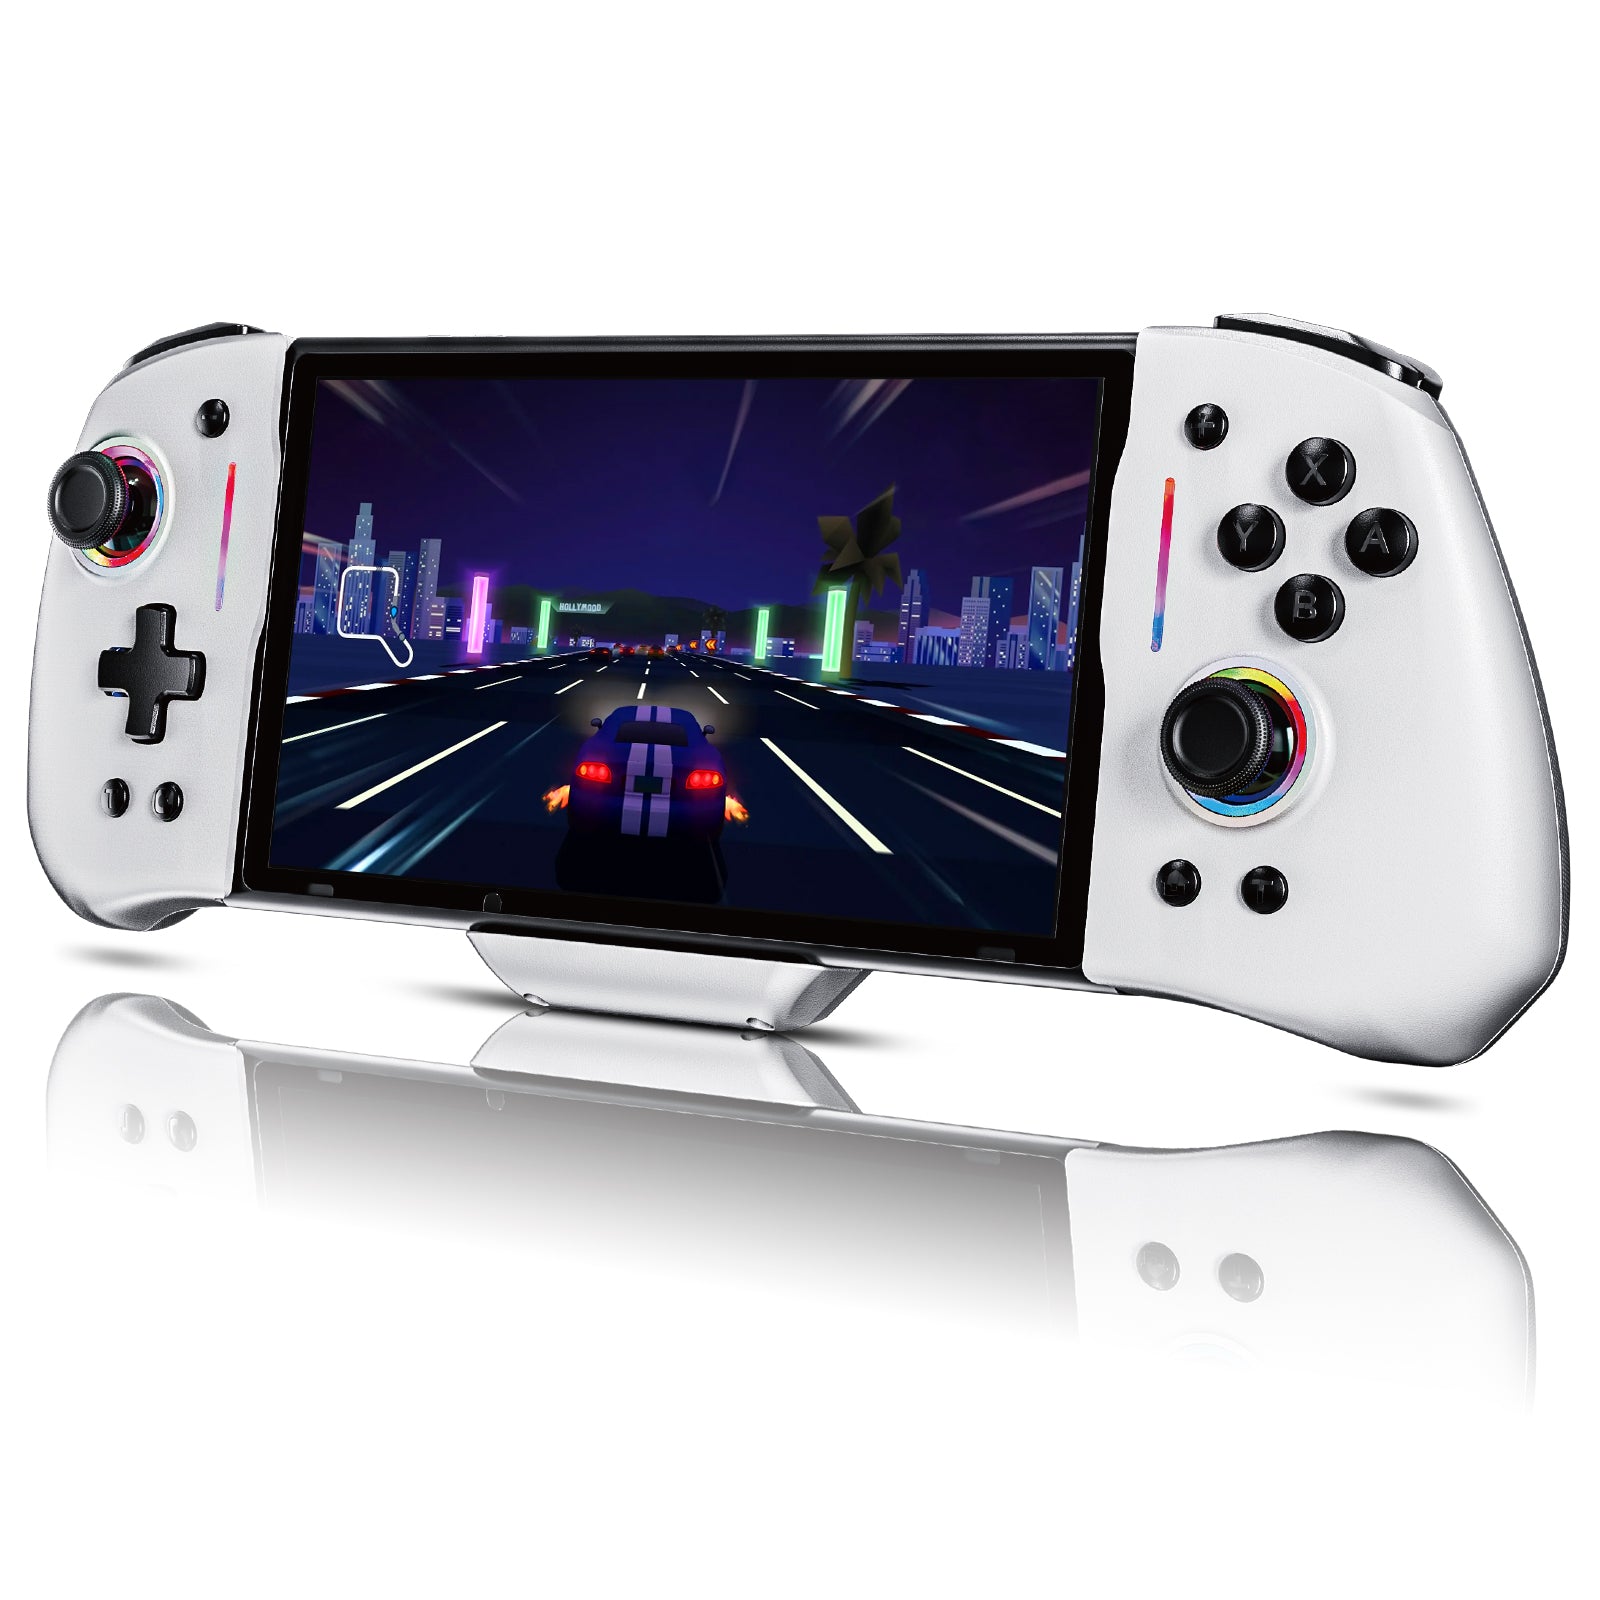 The image showcases the white skin and RGB lighting effects of the Bluetooth controller